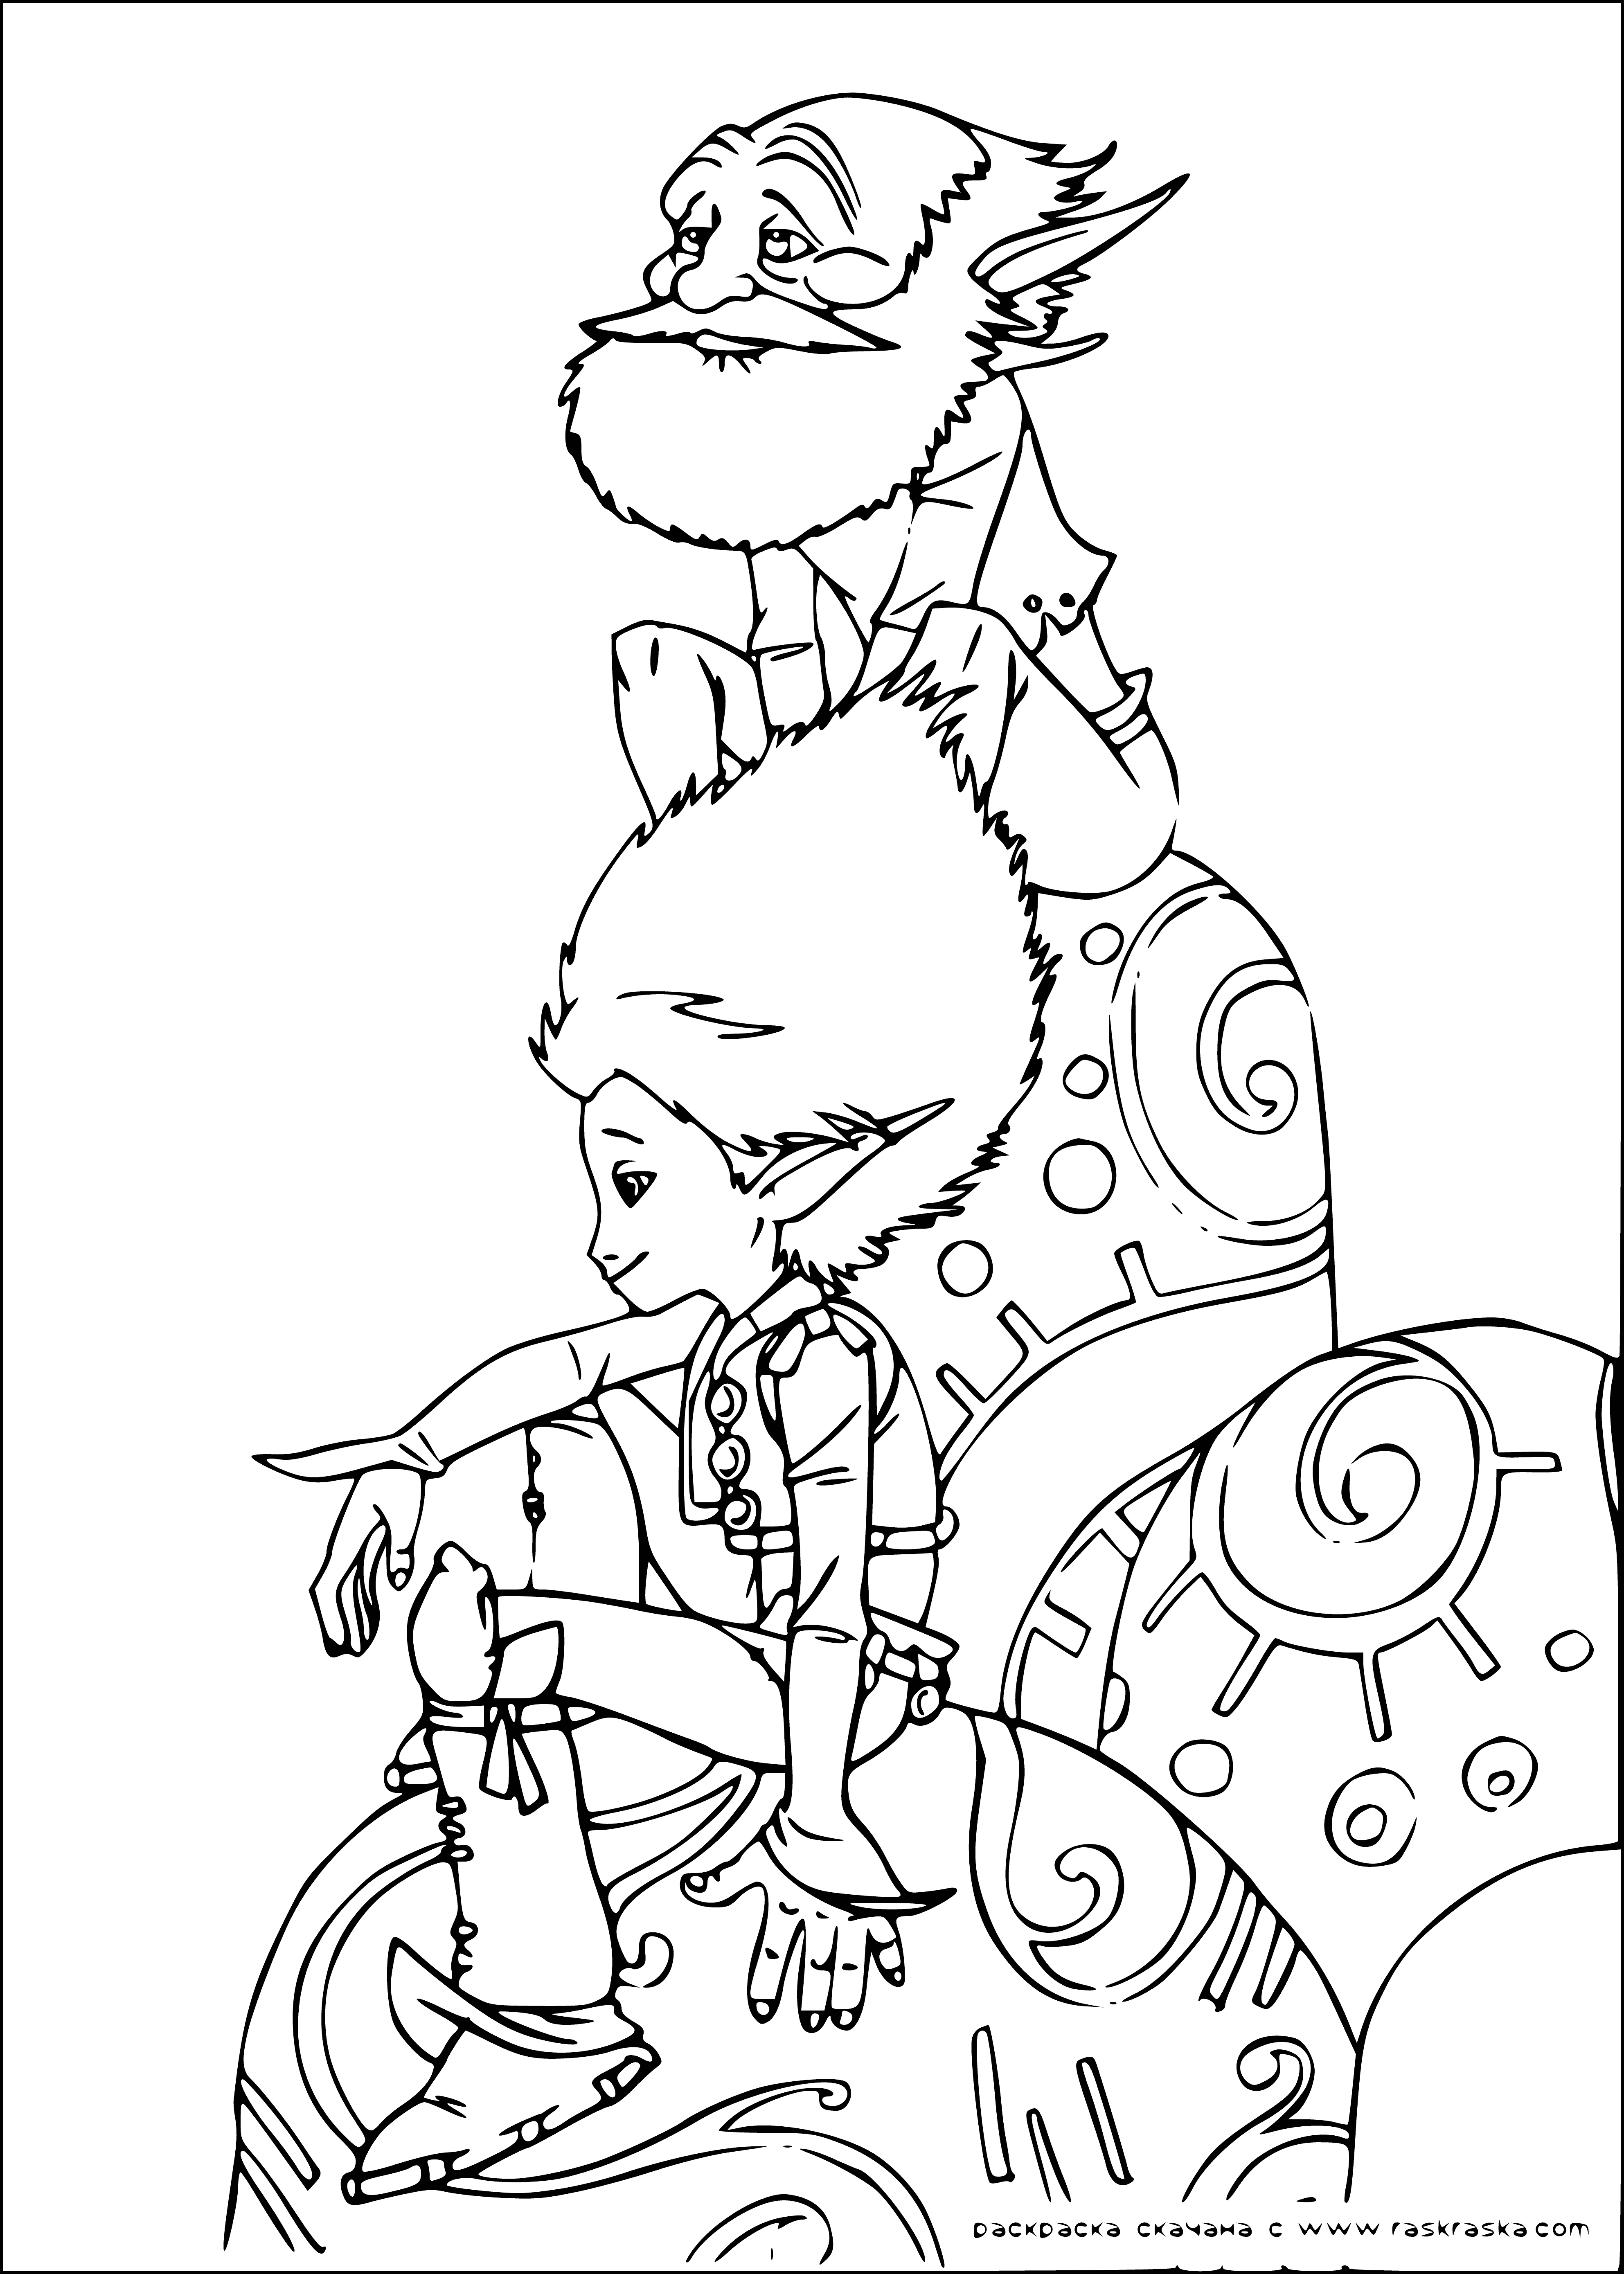 coloring page: Old man & boy in living room, book & tea on table, Arthur listening to old man.